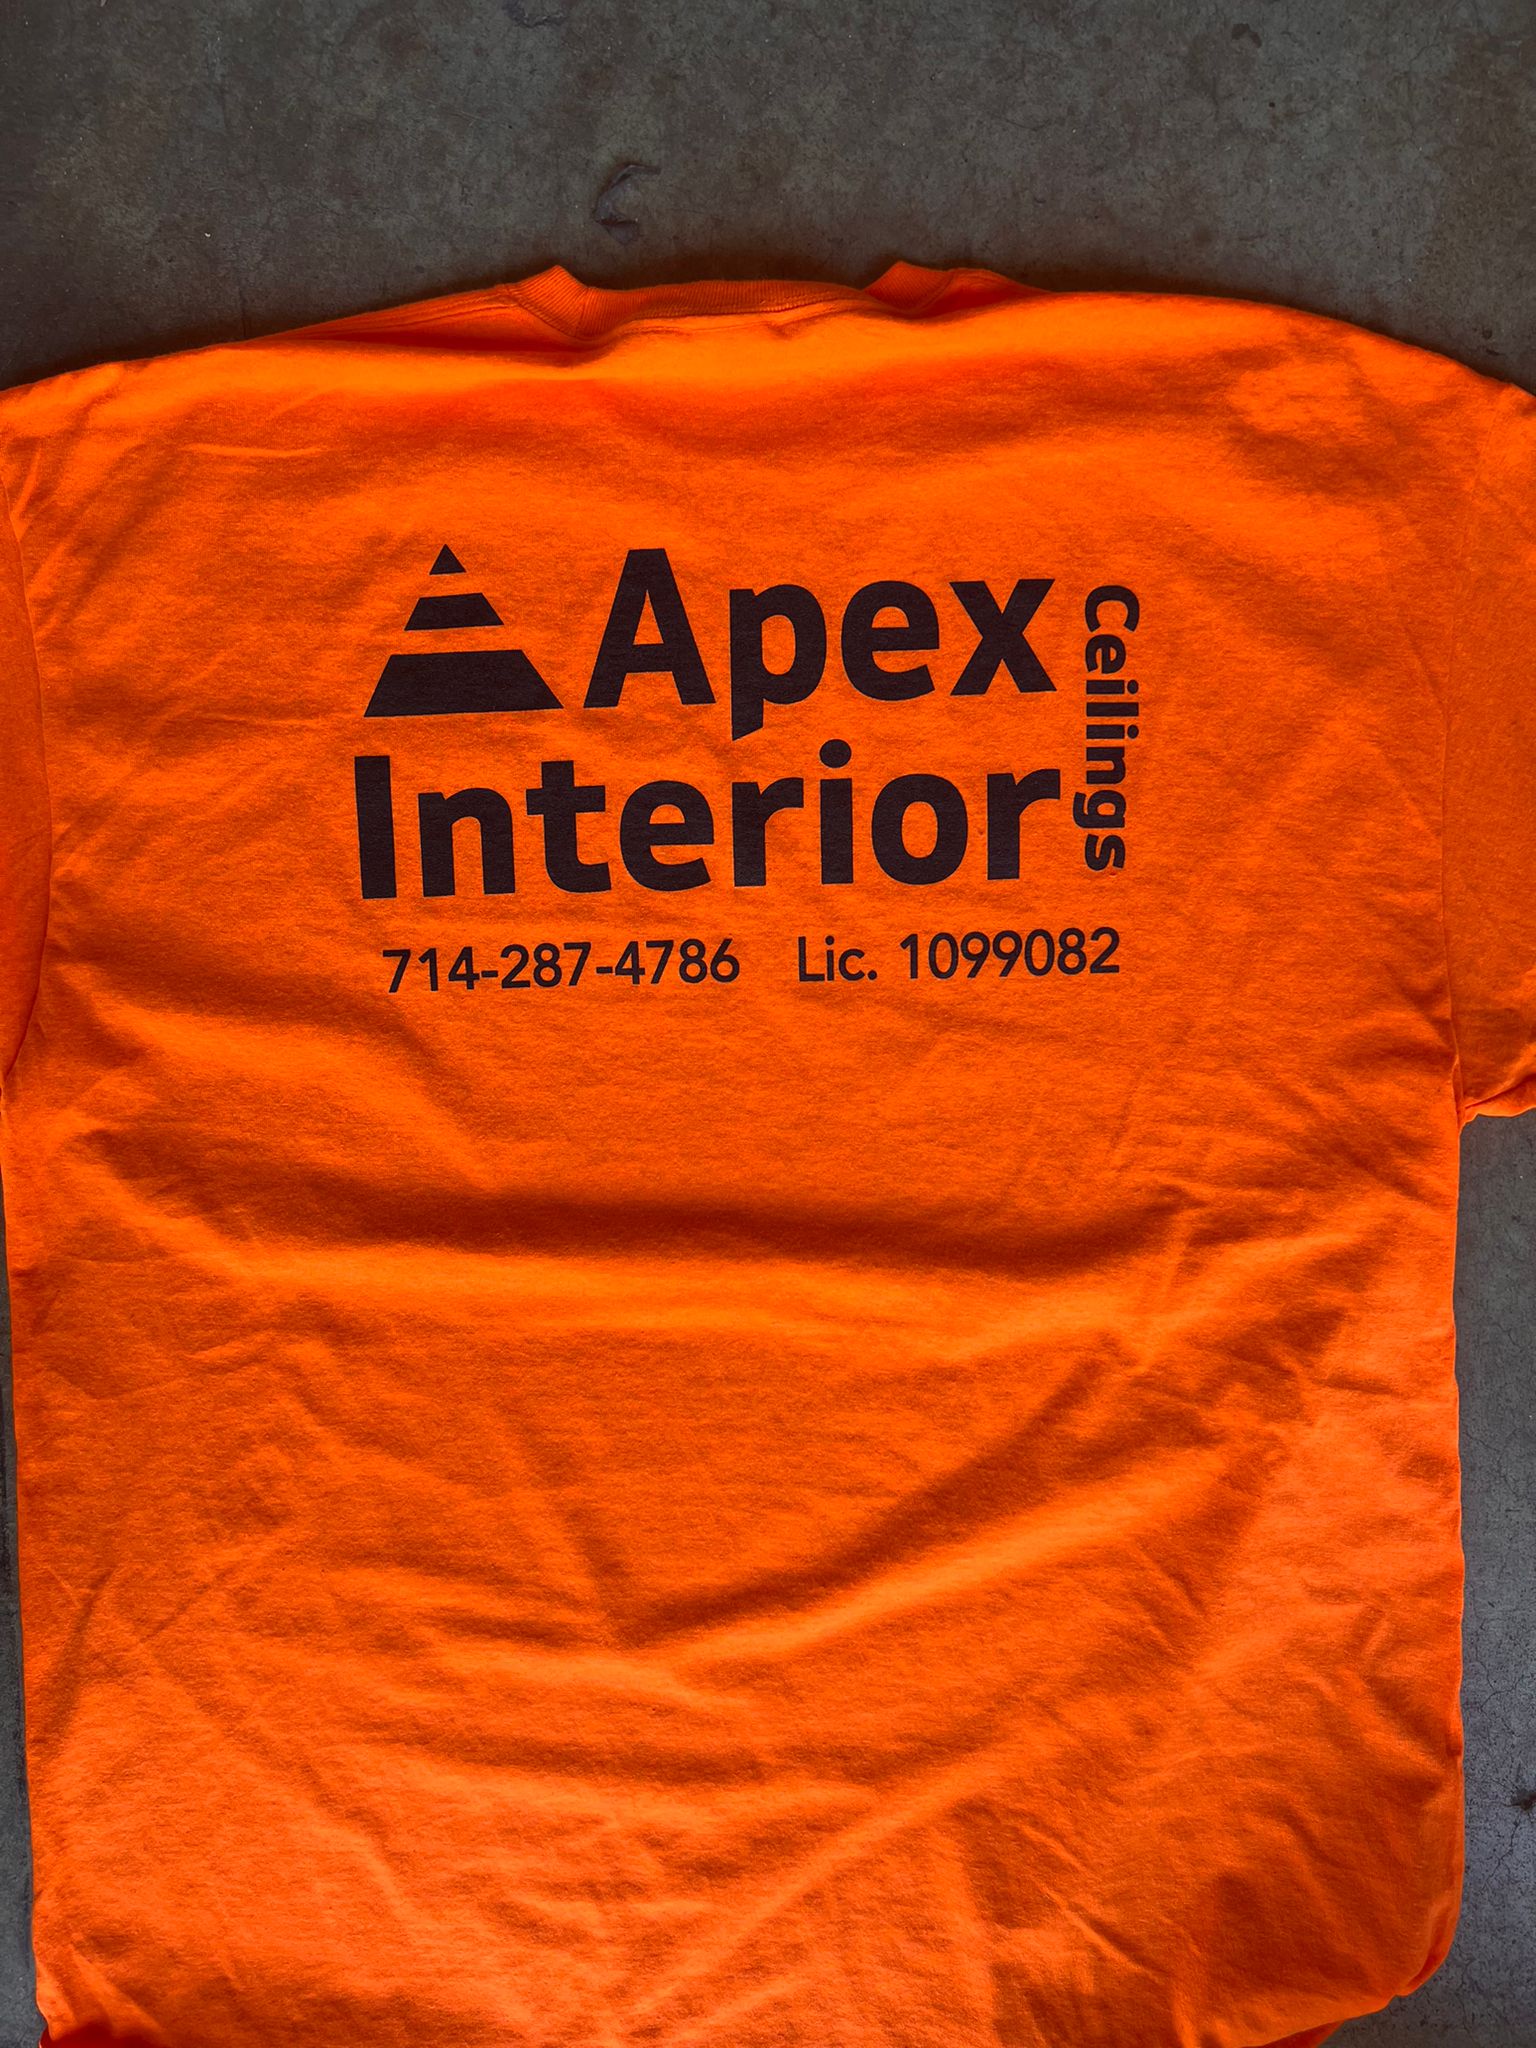 Customizable Shirts Printed with your Company Logo or Brand Name